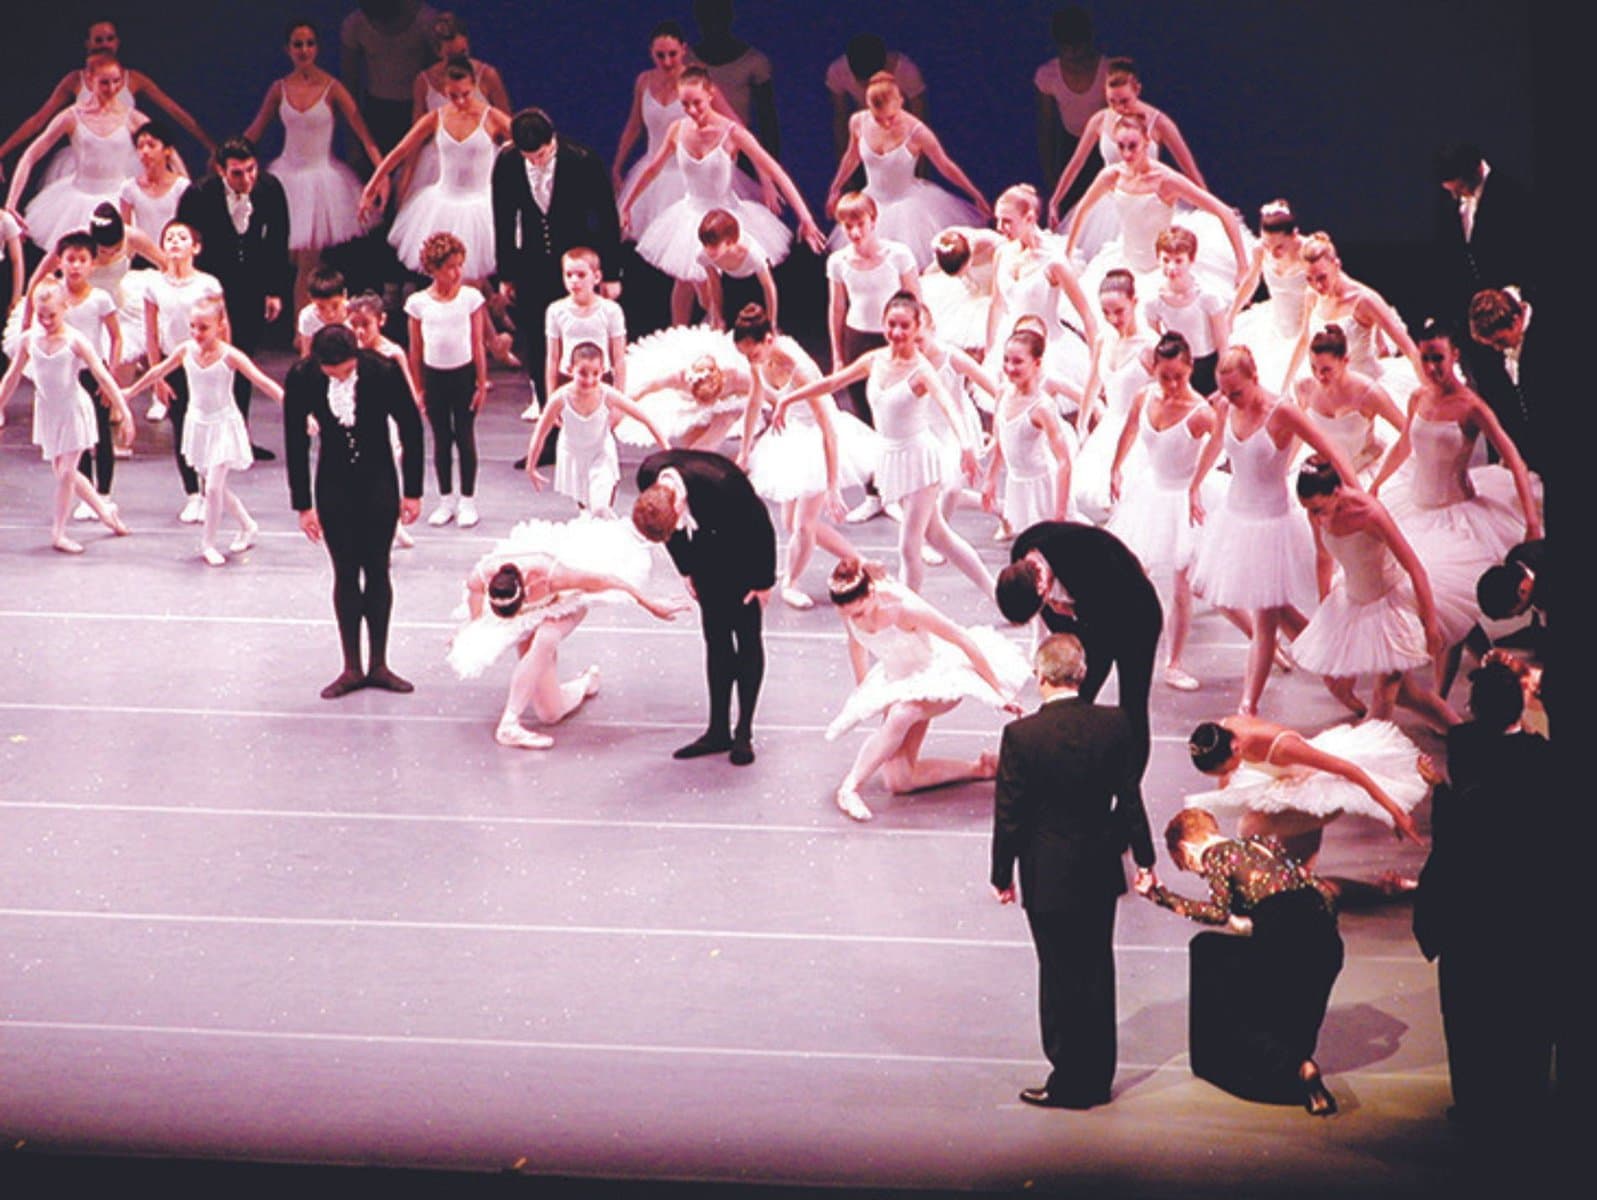 On stage, a large group of ballet dancers and students, dressed in black and white, bow towards Kent Stowell and Francia Russell. Francia is in a deep curtsy.